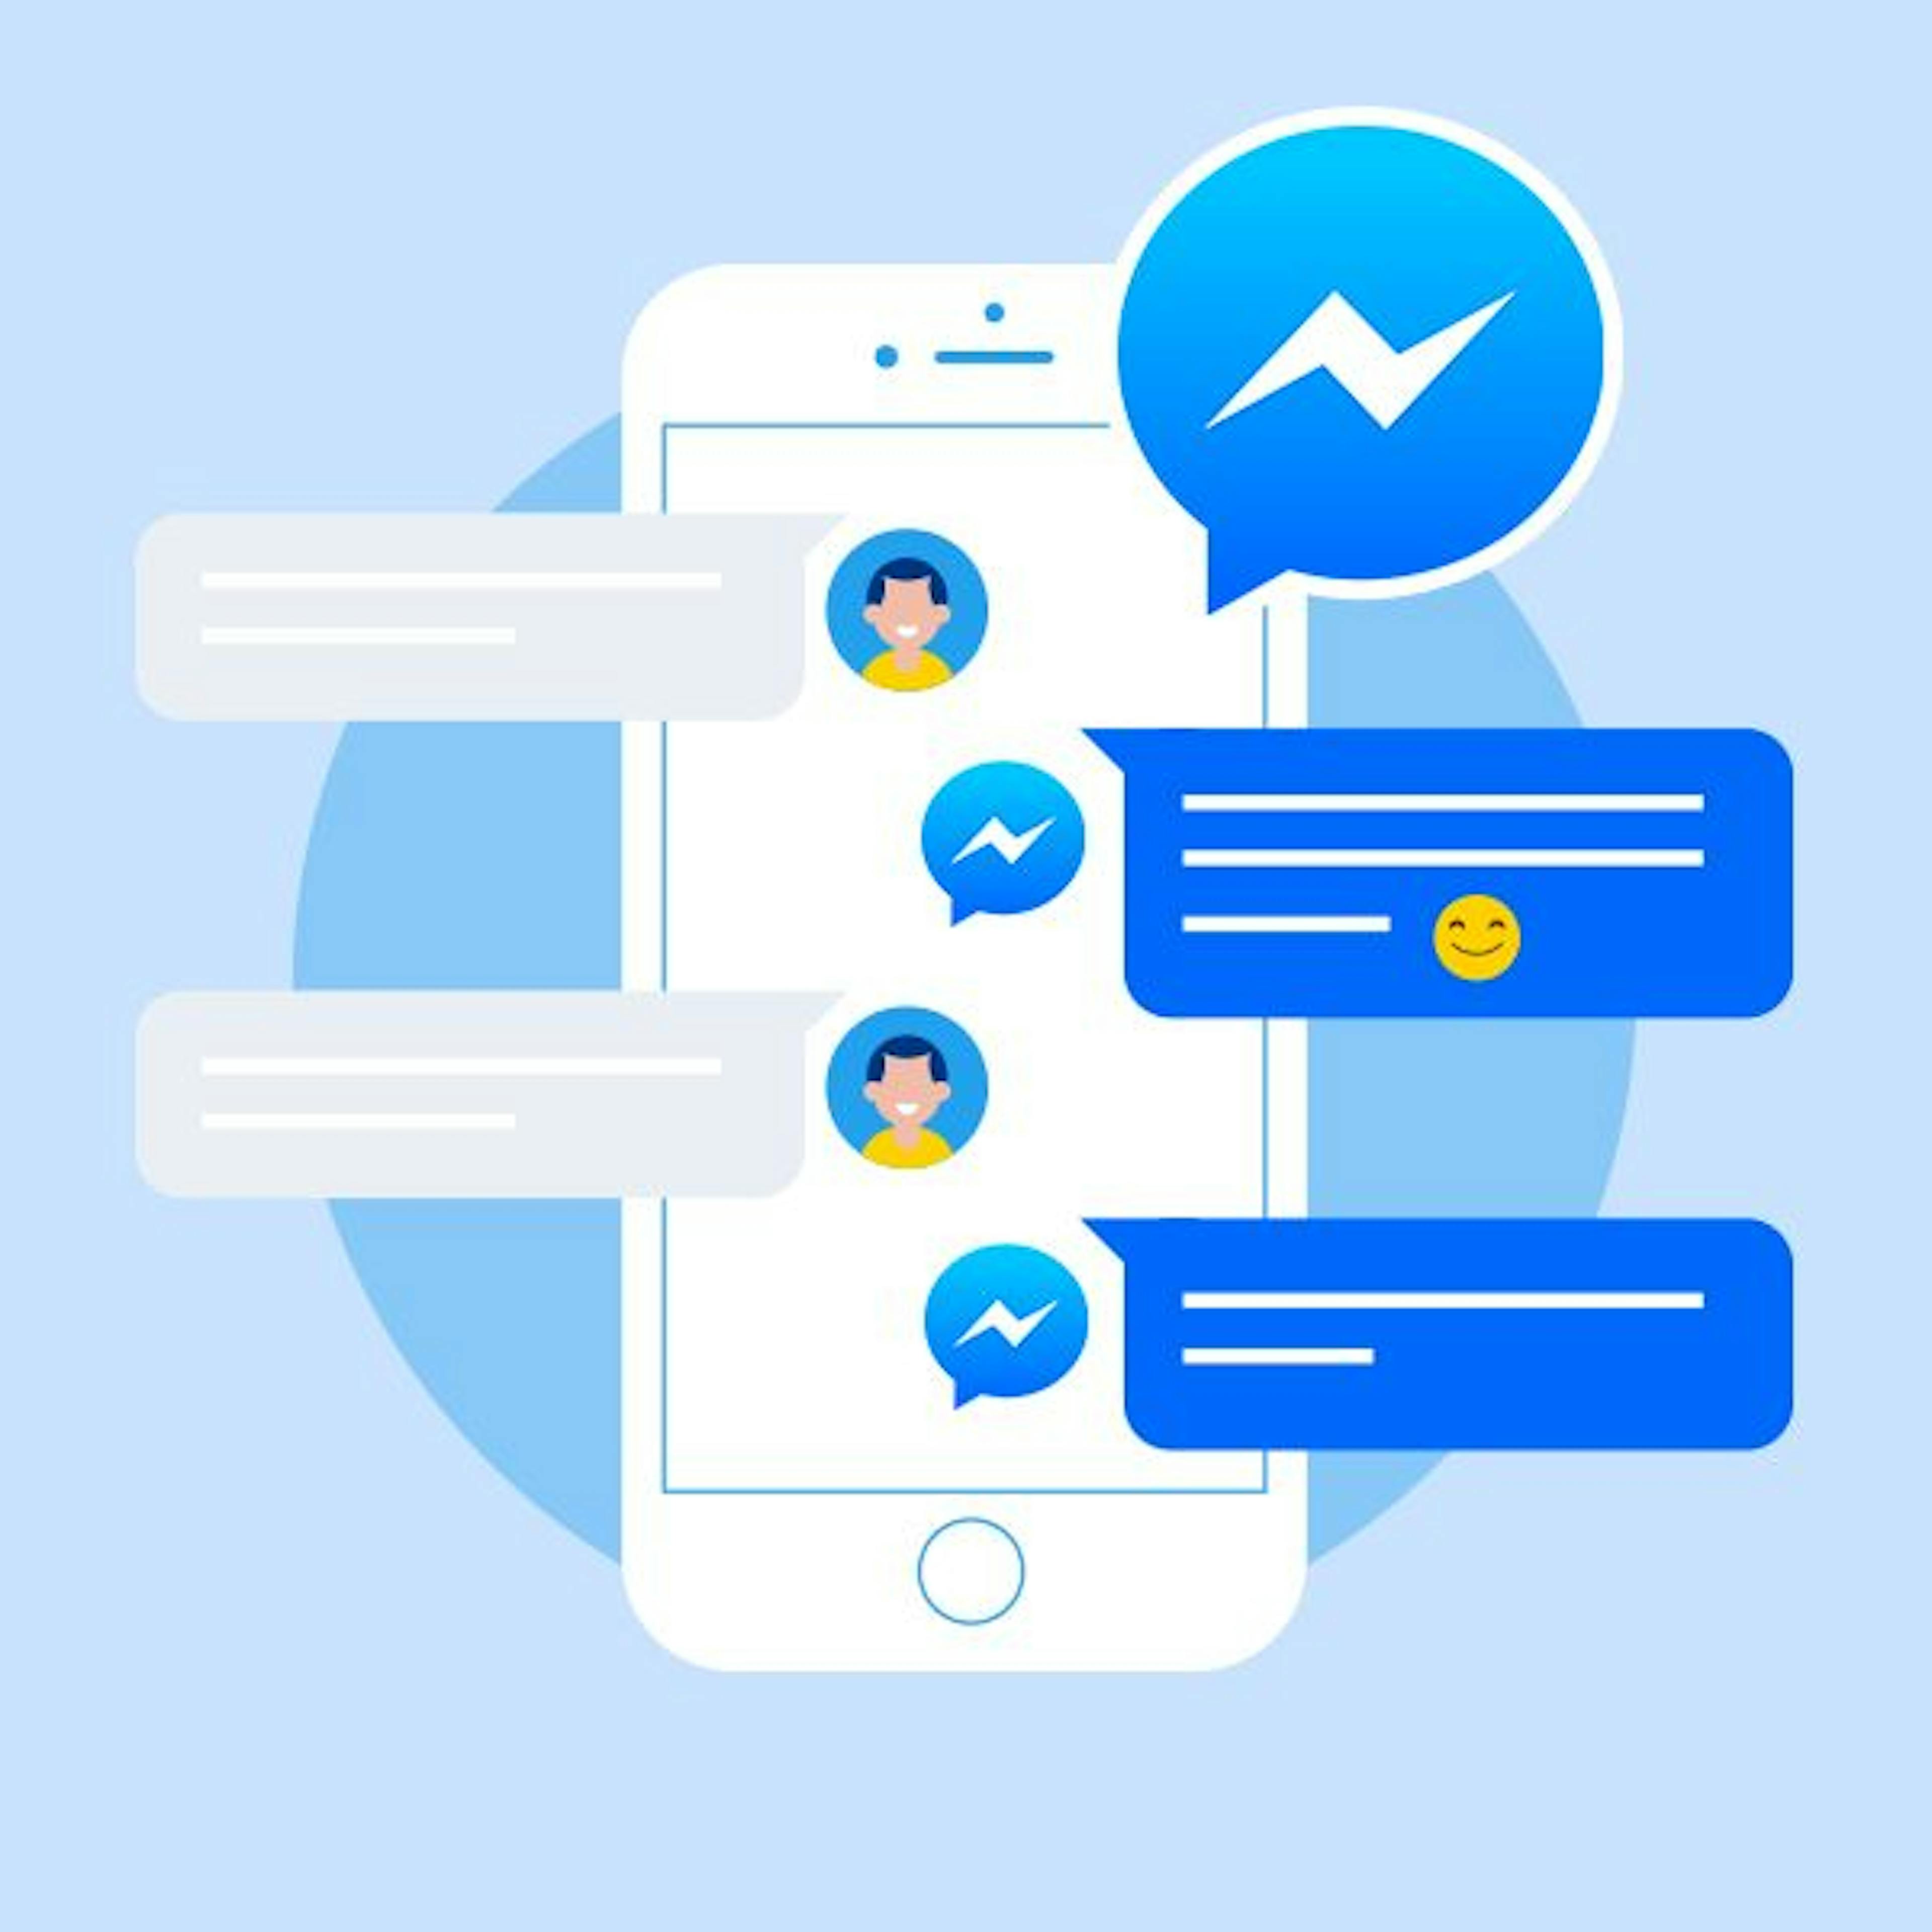 /15-reasons-for-business-to-get-facebook-chatbot-1r4l37cm feature image